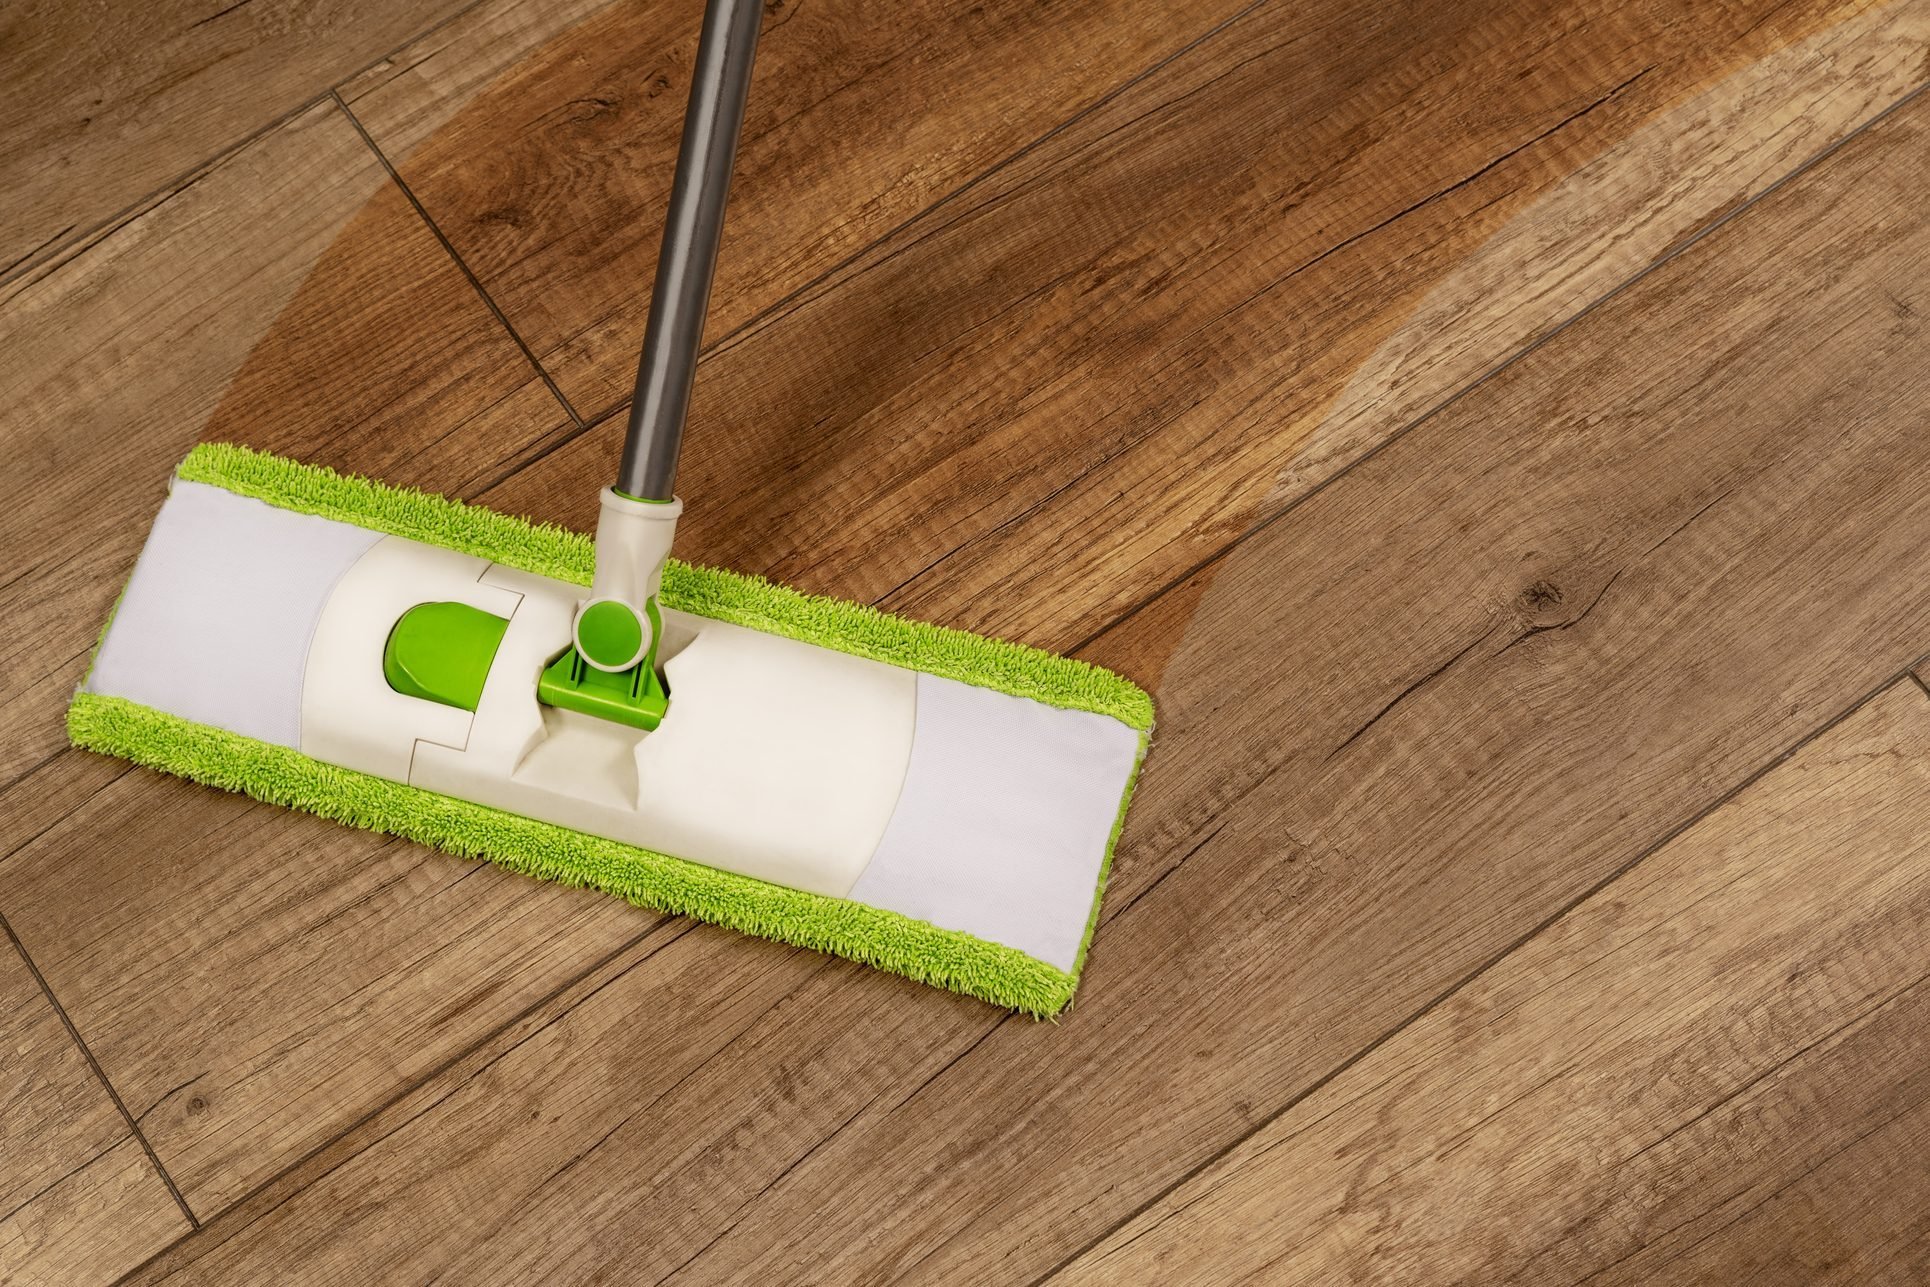 Top Tips for Cleaning Your Kitchen Floor